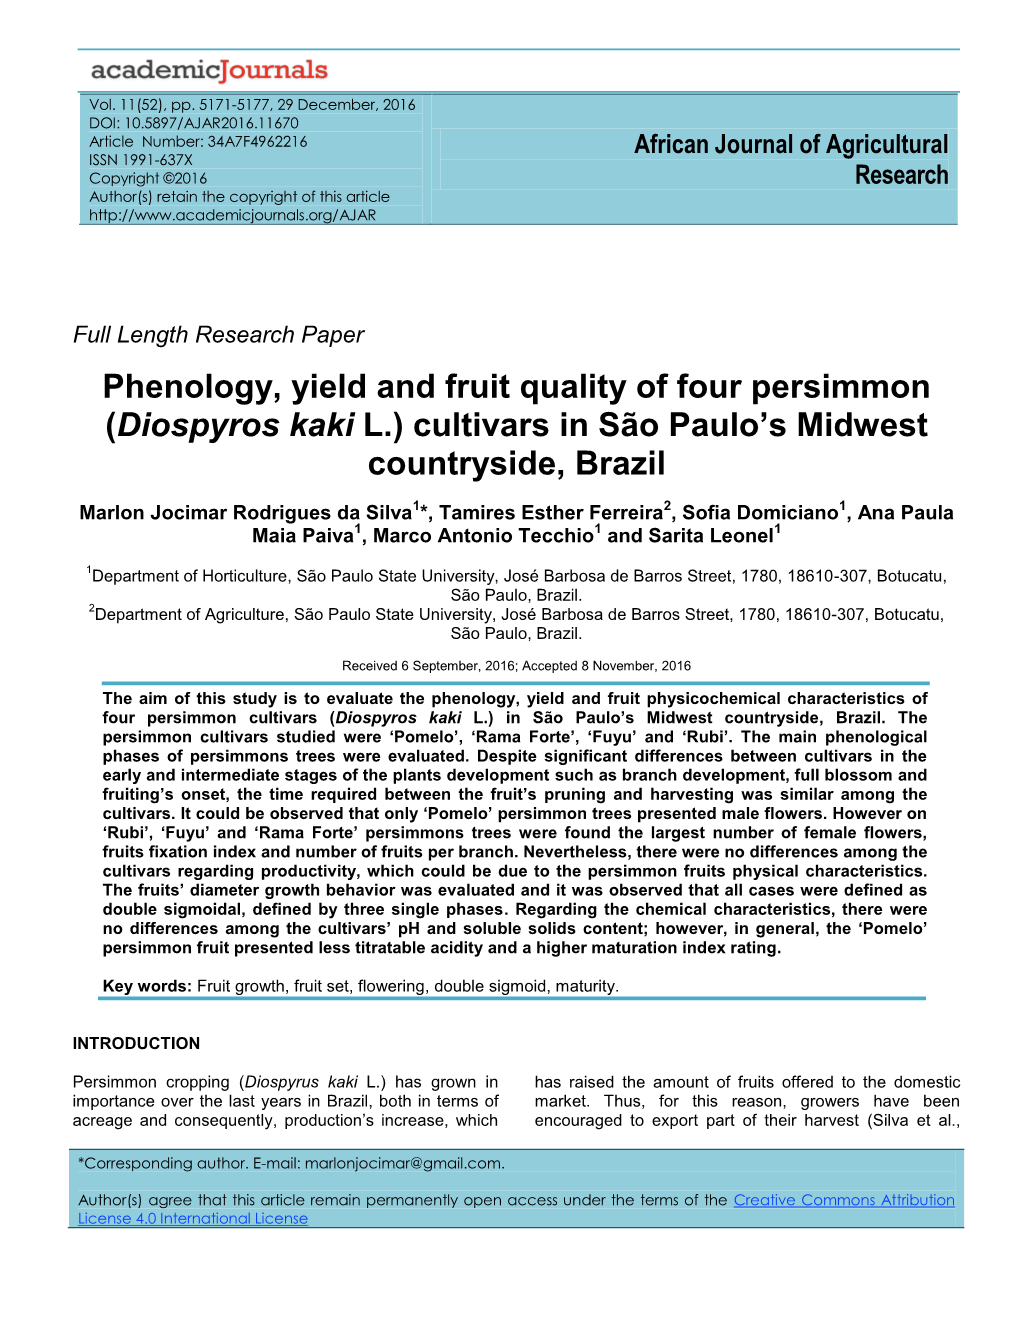 Phenology, Yield and Fruit Quality of Four Persimmon (Diospyros Kaki L.) Cultivars in São Paulo’S Midwest Countryside, Brazil